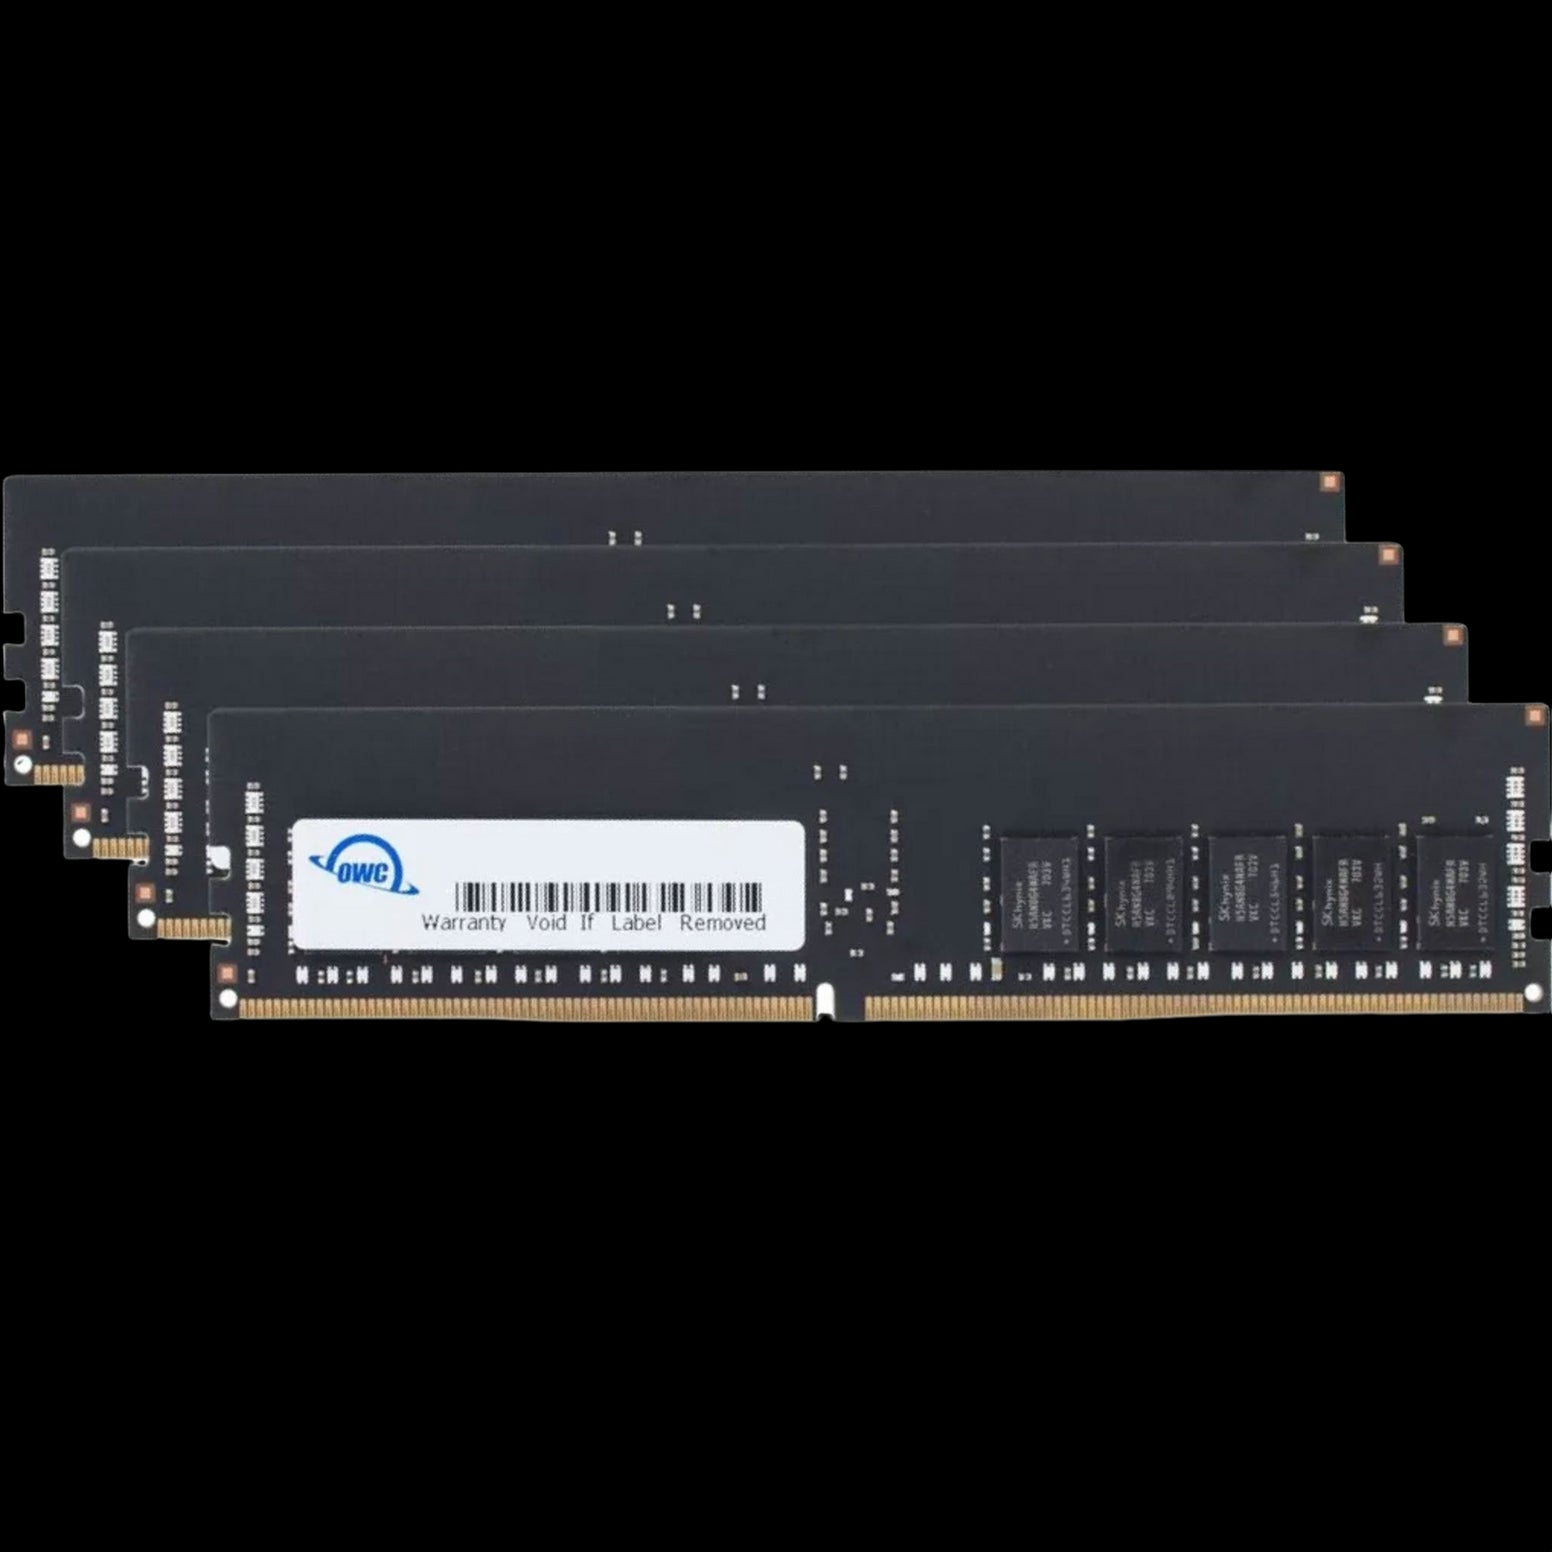 64GB OWC Matched Memory Upgrade Kit (4 x 16GB) 2666MHZ PC4-21300 DDR4 RDIMM with Adhesive Strips (for iMac Pro)